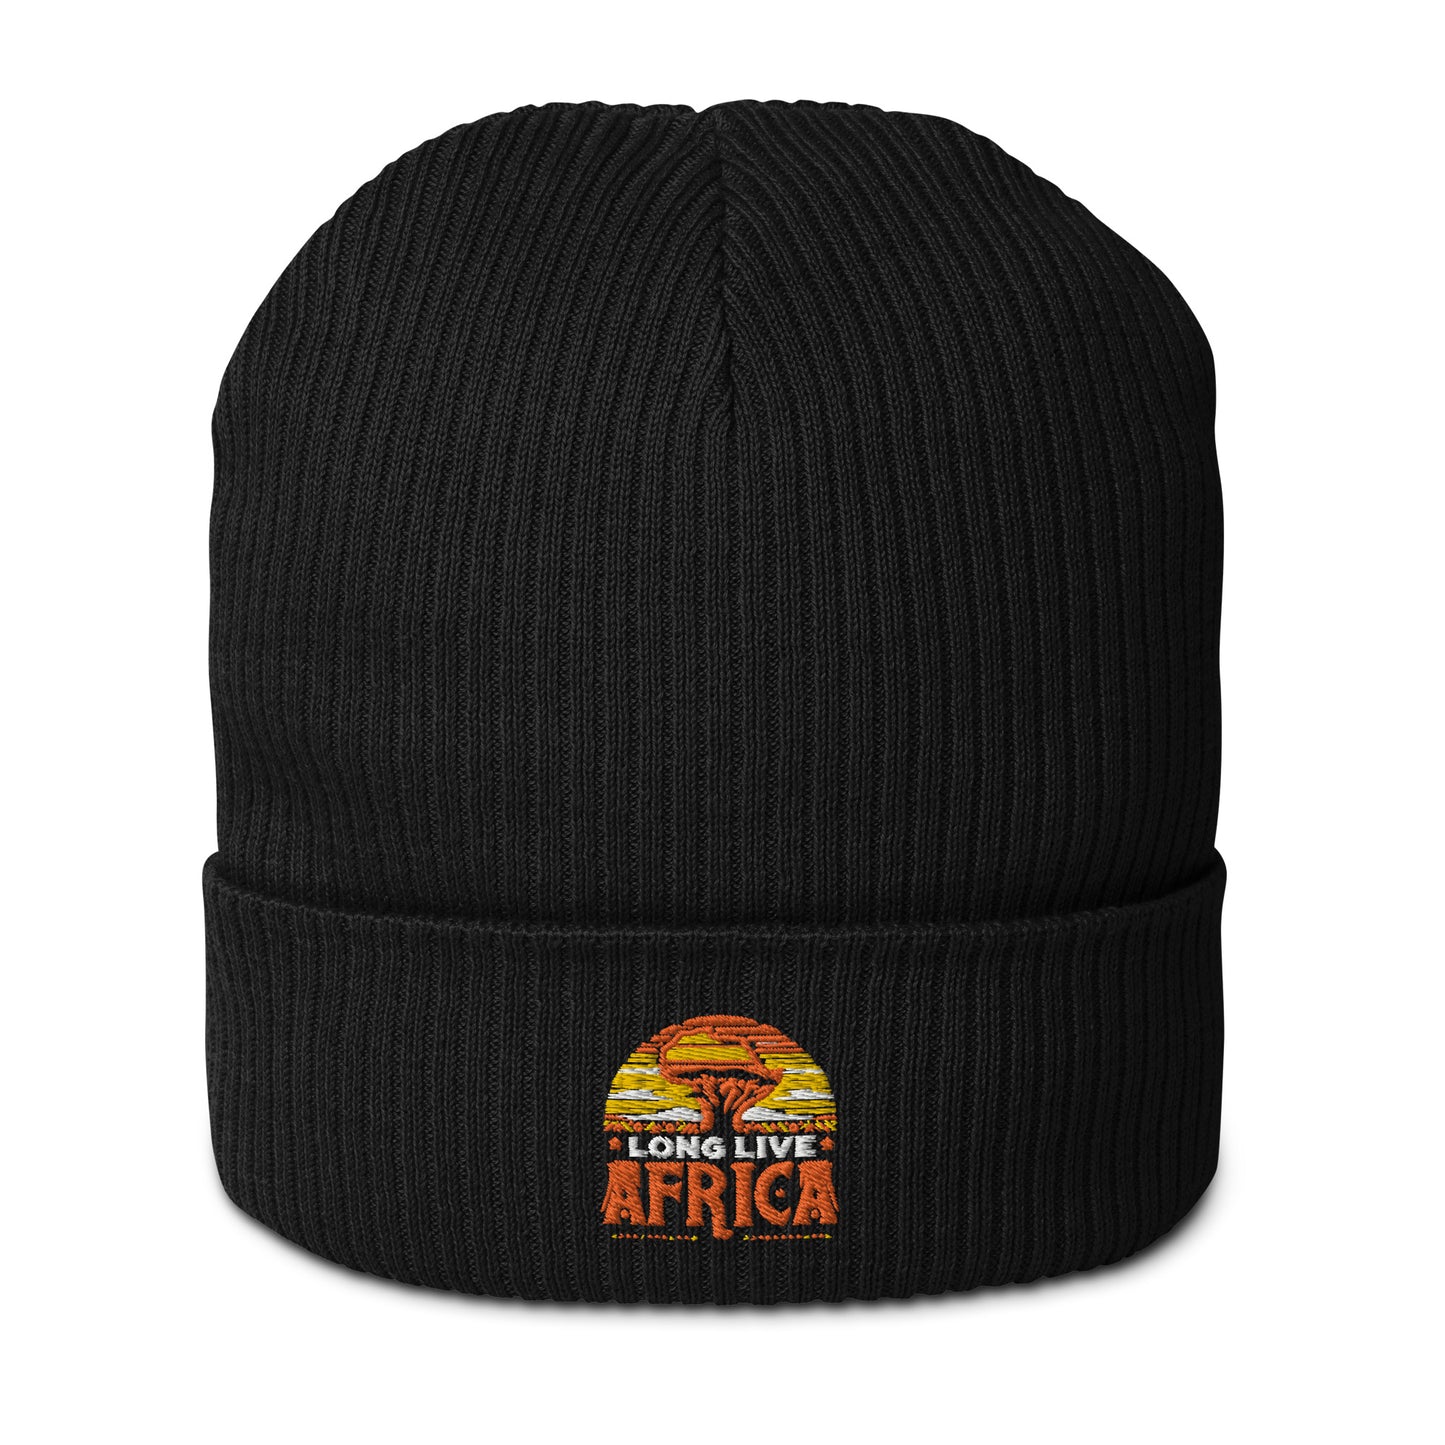 LONG LIVE AFRICA - Organic ribbed beanie